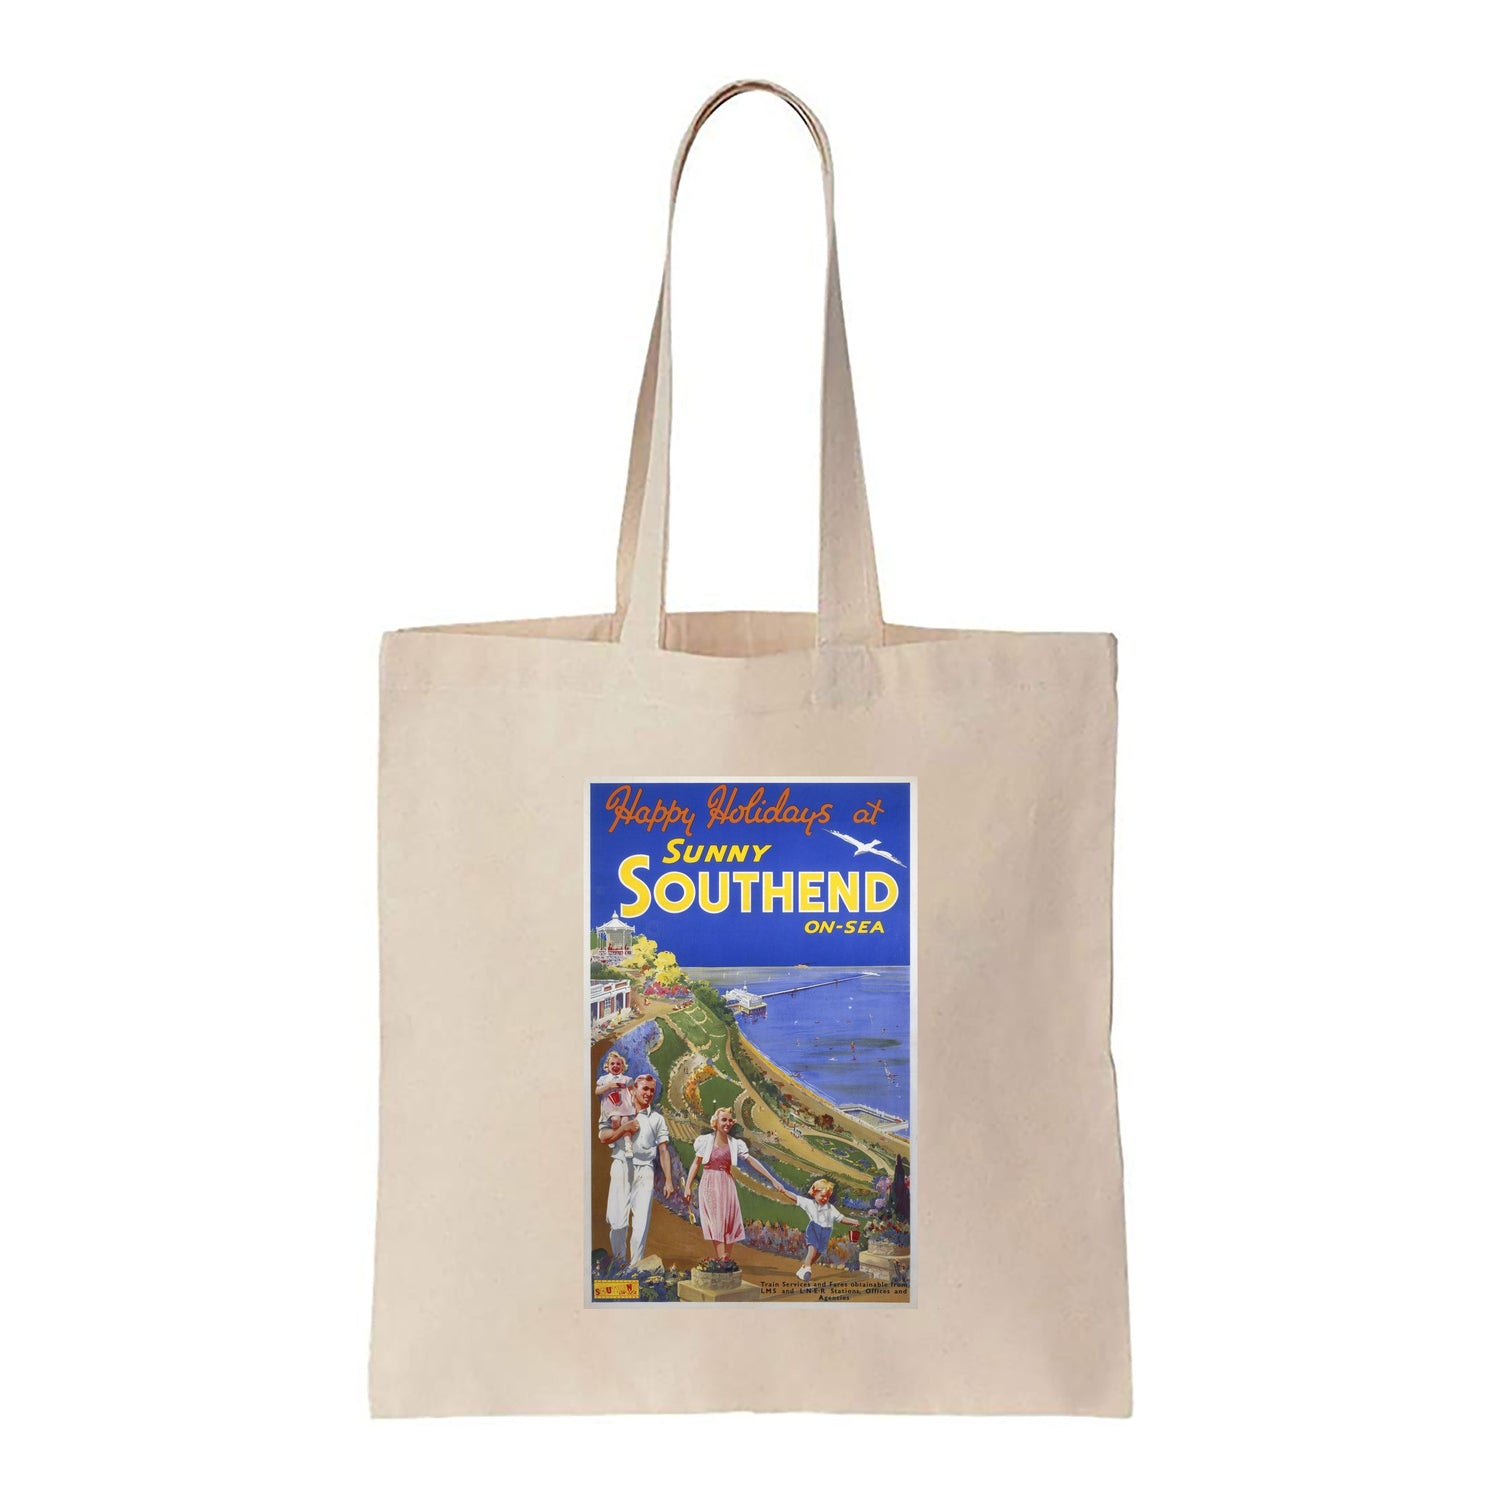 Sunny Southend on Sea - Happy Holidays - Canvas Tote Bag